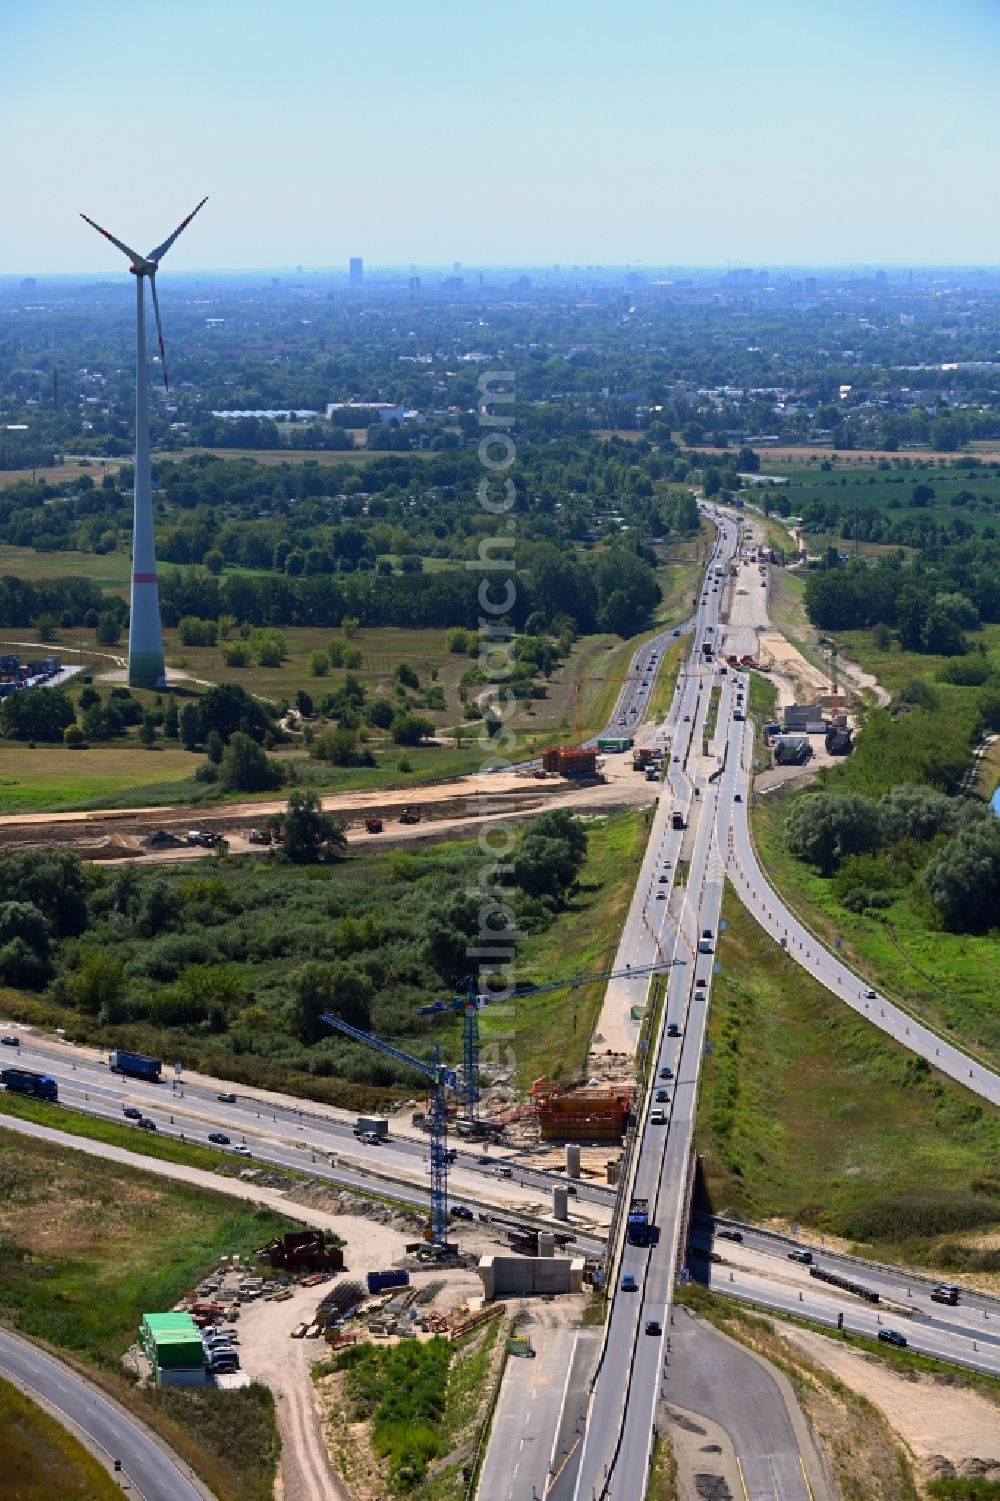 Aerial photograph Schönerlinde - Construction to extend the traffic flow at the intersection- motorway A 114 - A10 - Dreieck Pankow in Schoenerlinde in the state Brandenburg, Germany